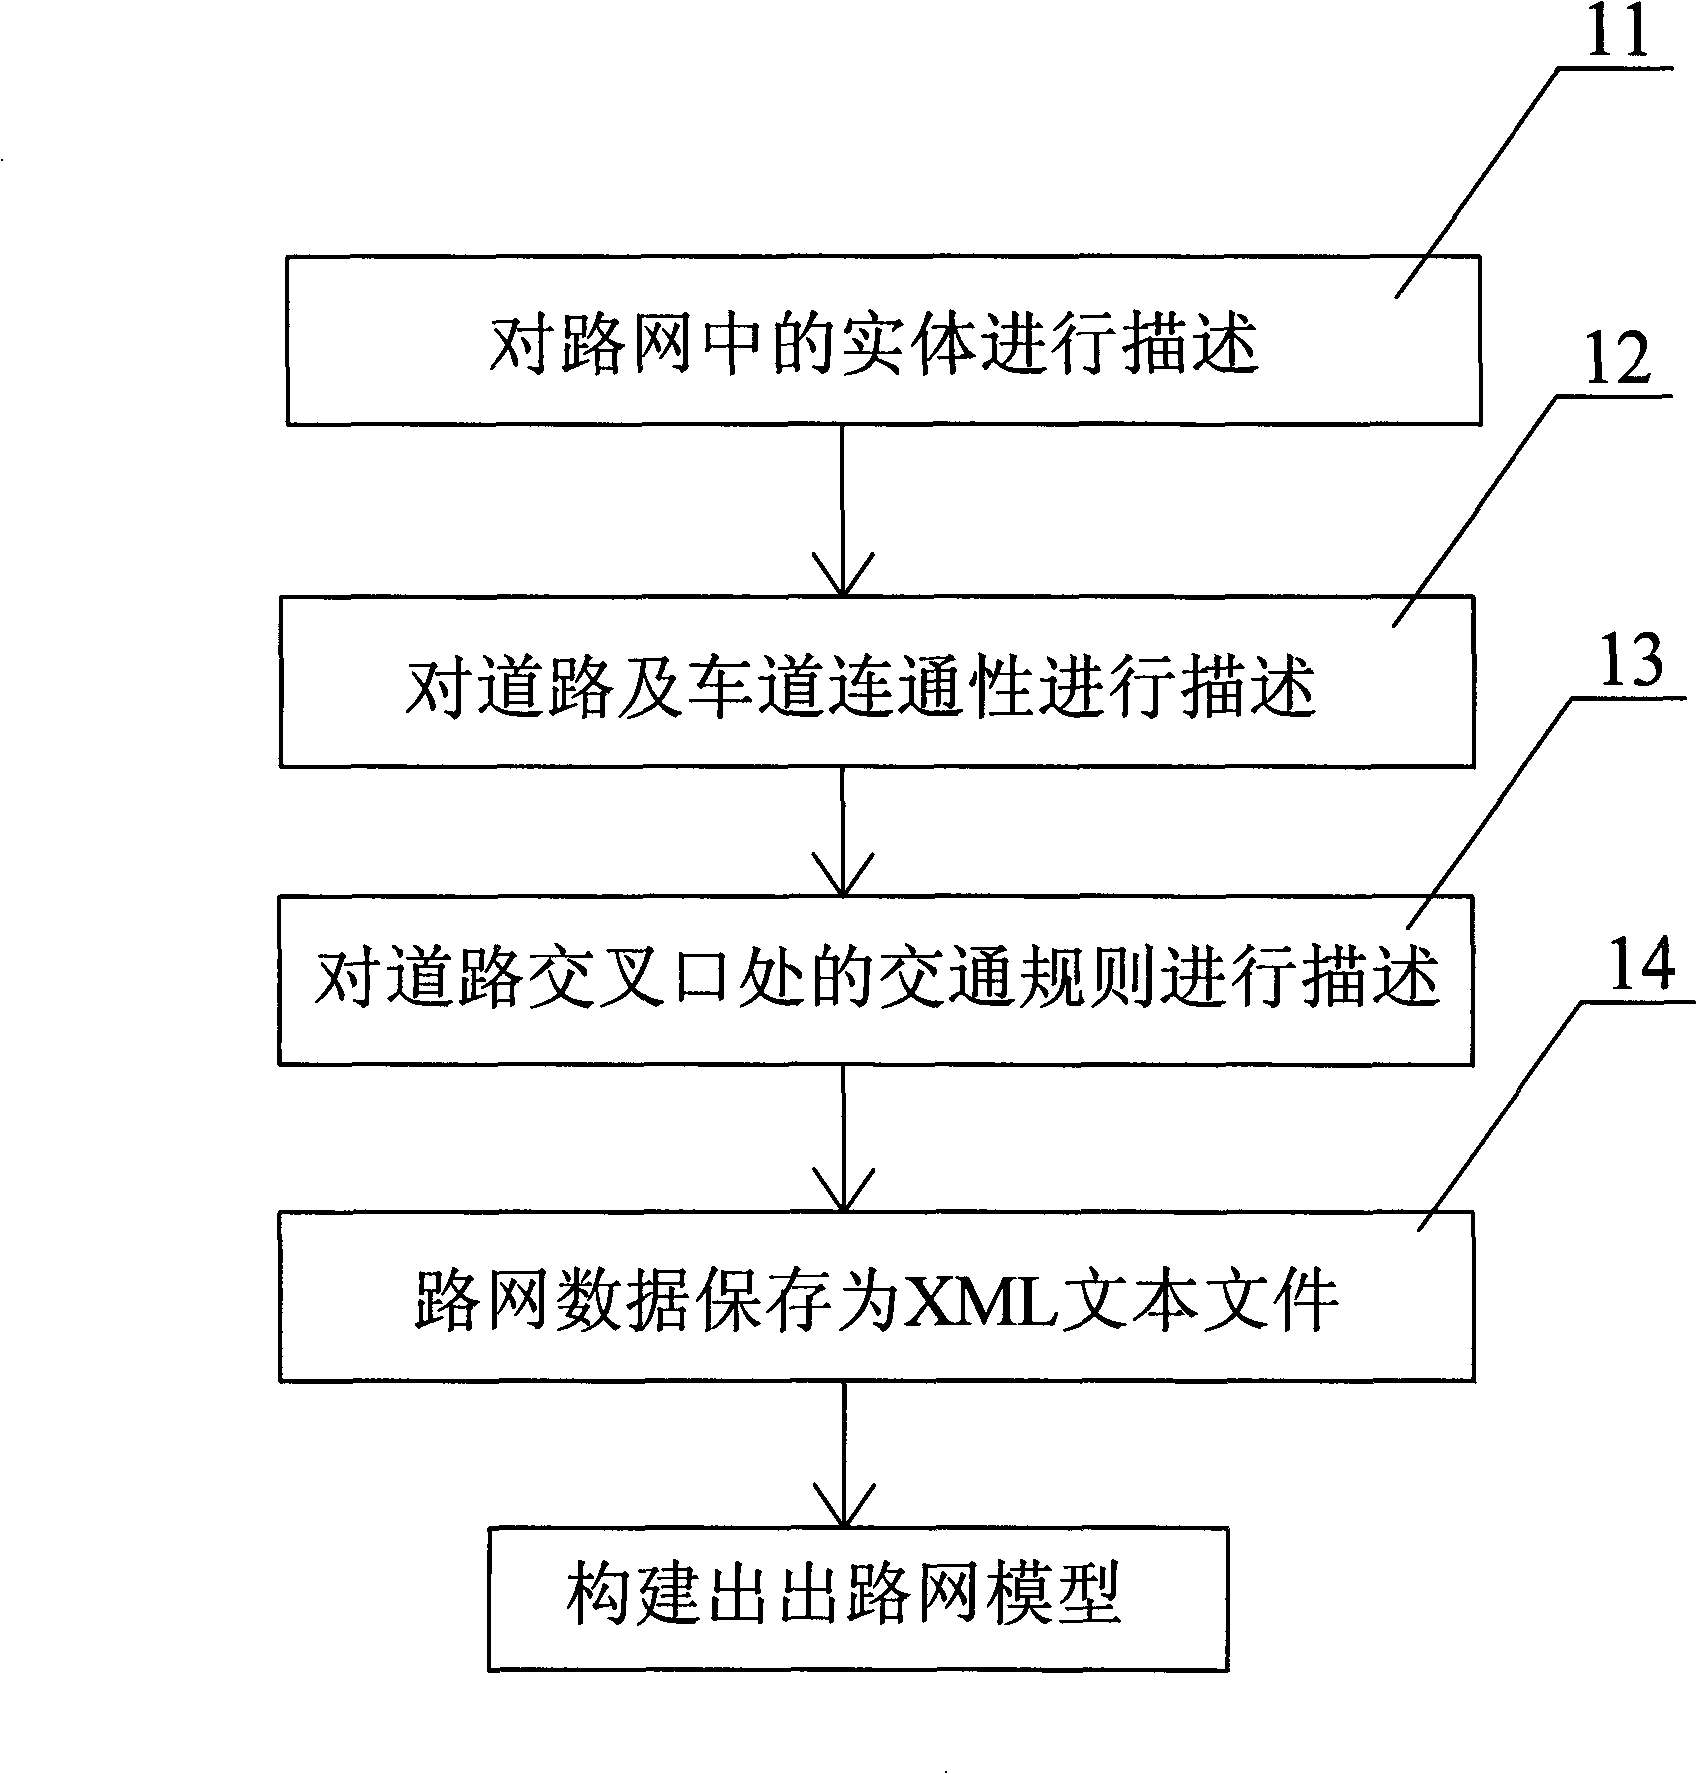 Process for constructing road net model for traffic navigation system and traffic emulation system